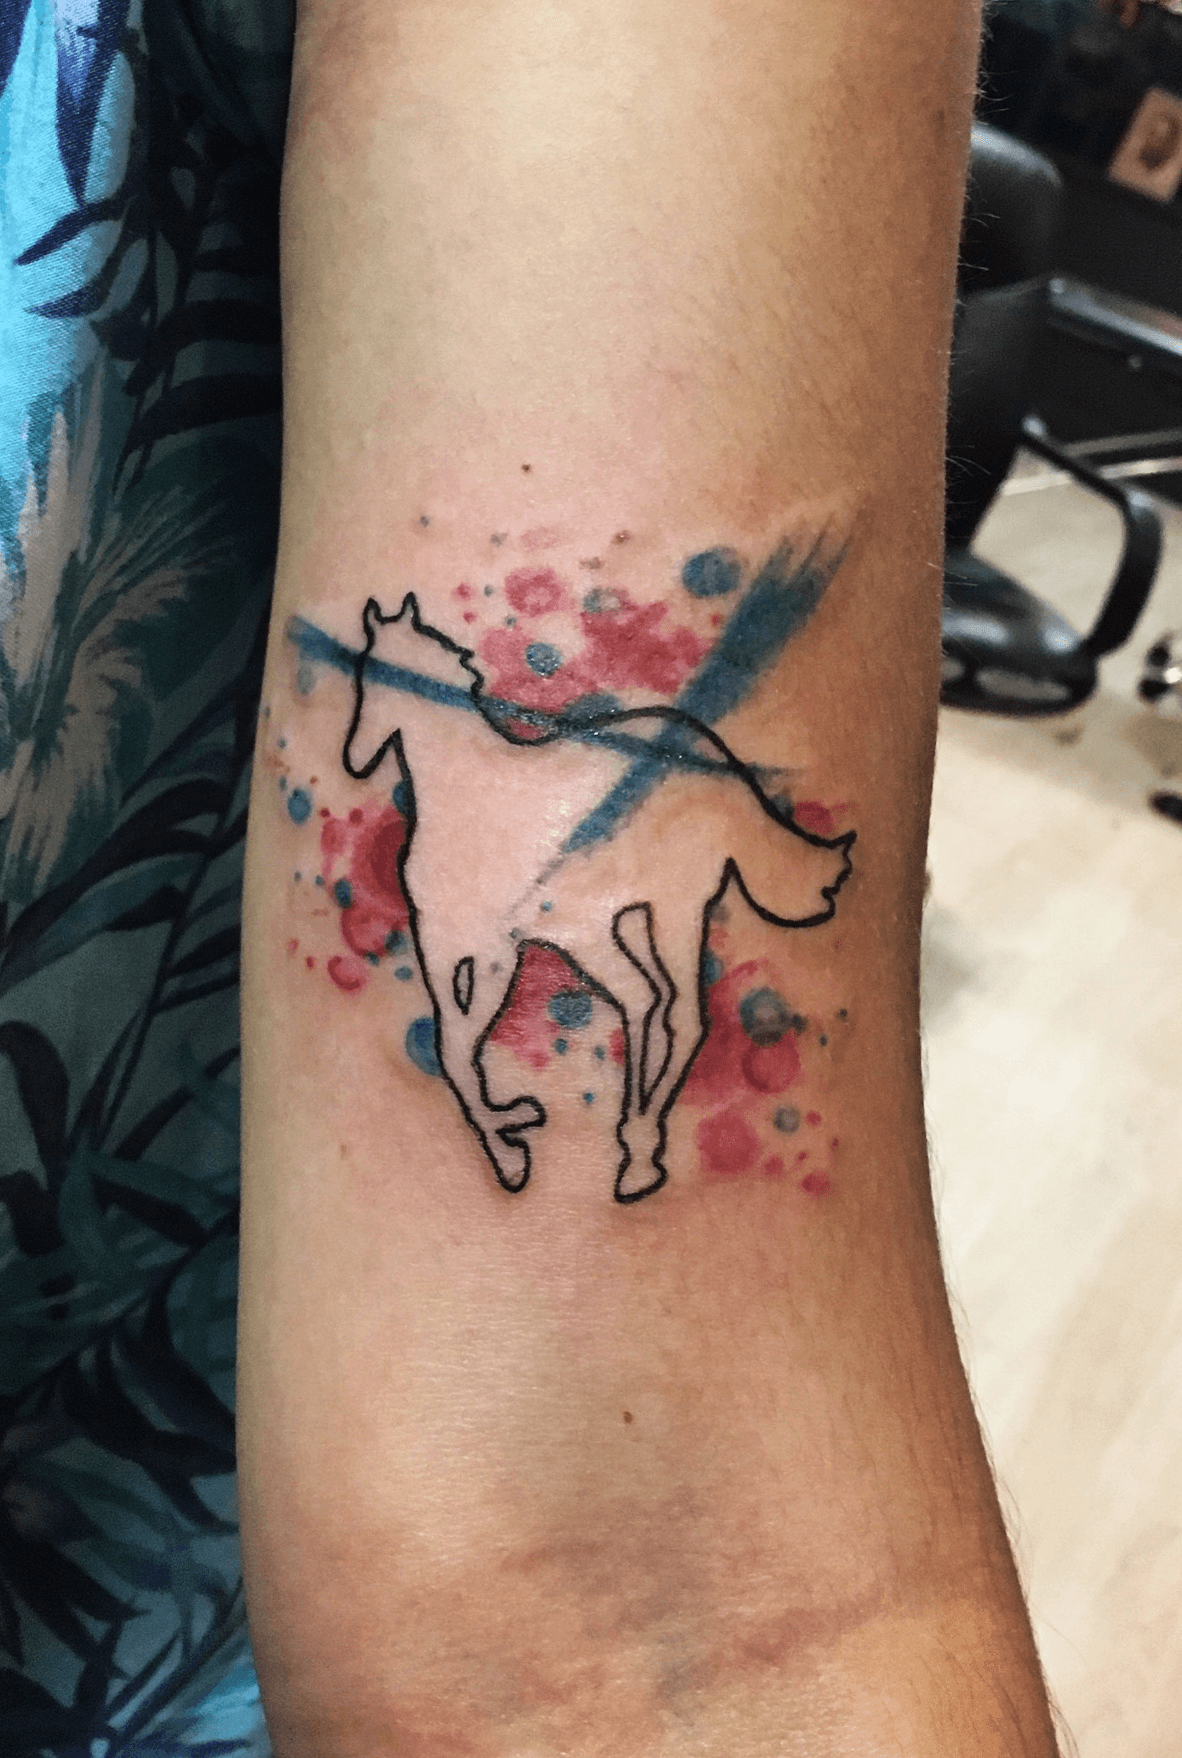 Tatted Dad Co  Deftones SelfTitled  White Pony  Facebook